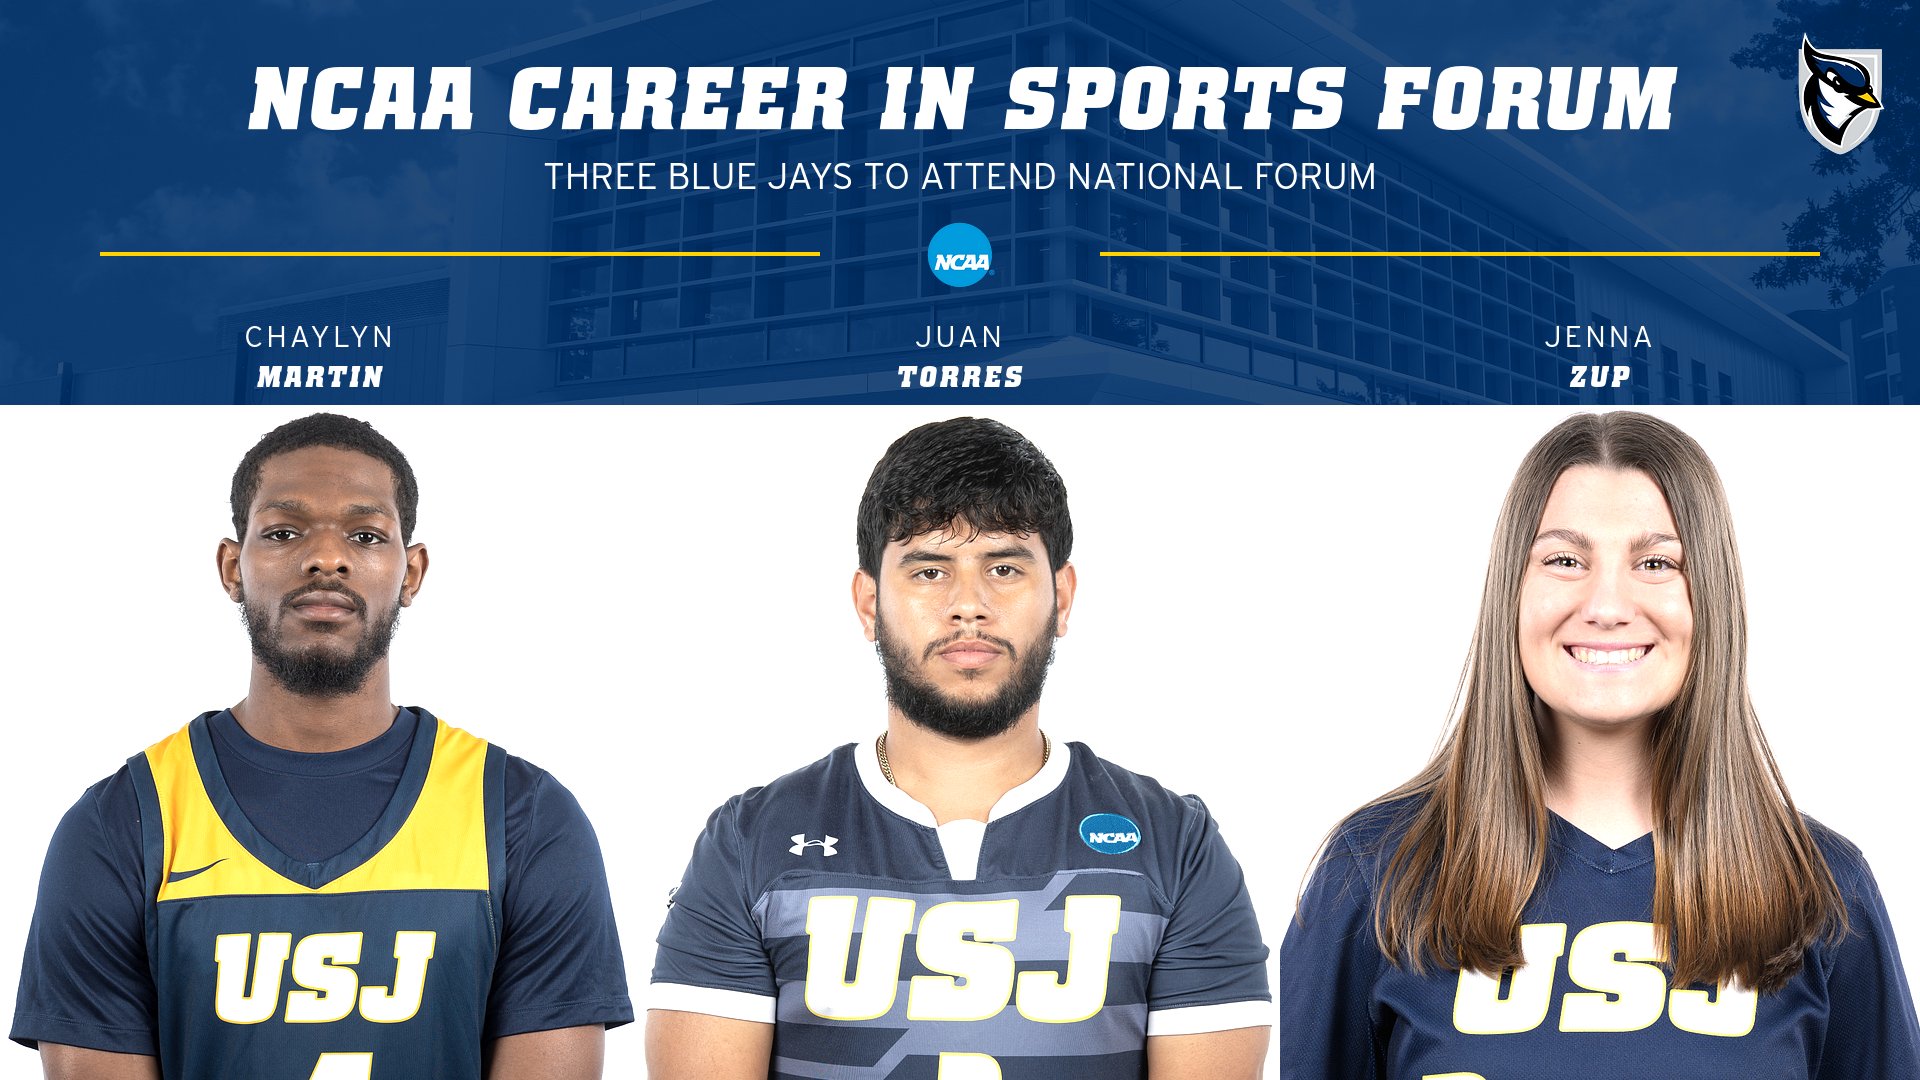 Martin, Torres, Zup Selected To Attend NCAA Career In Sports Forum